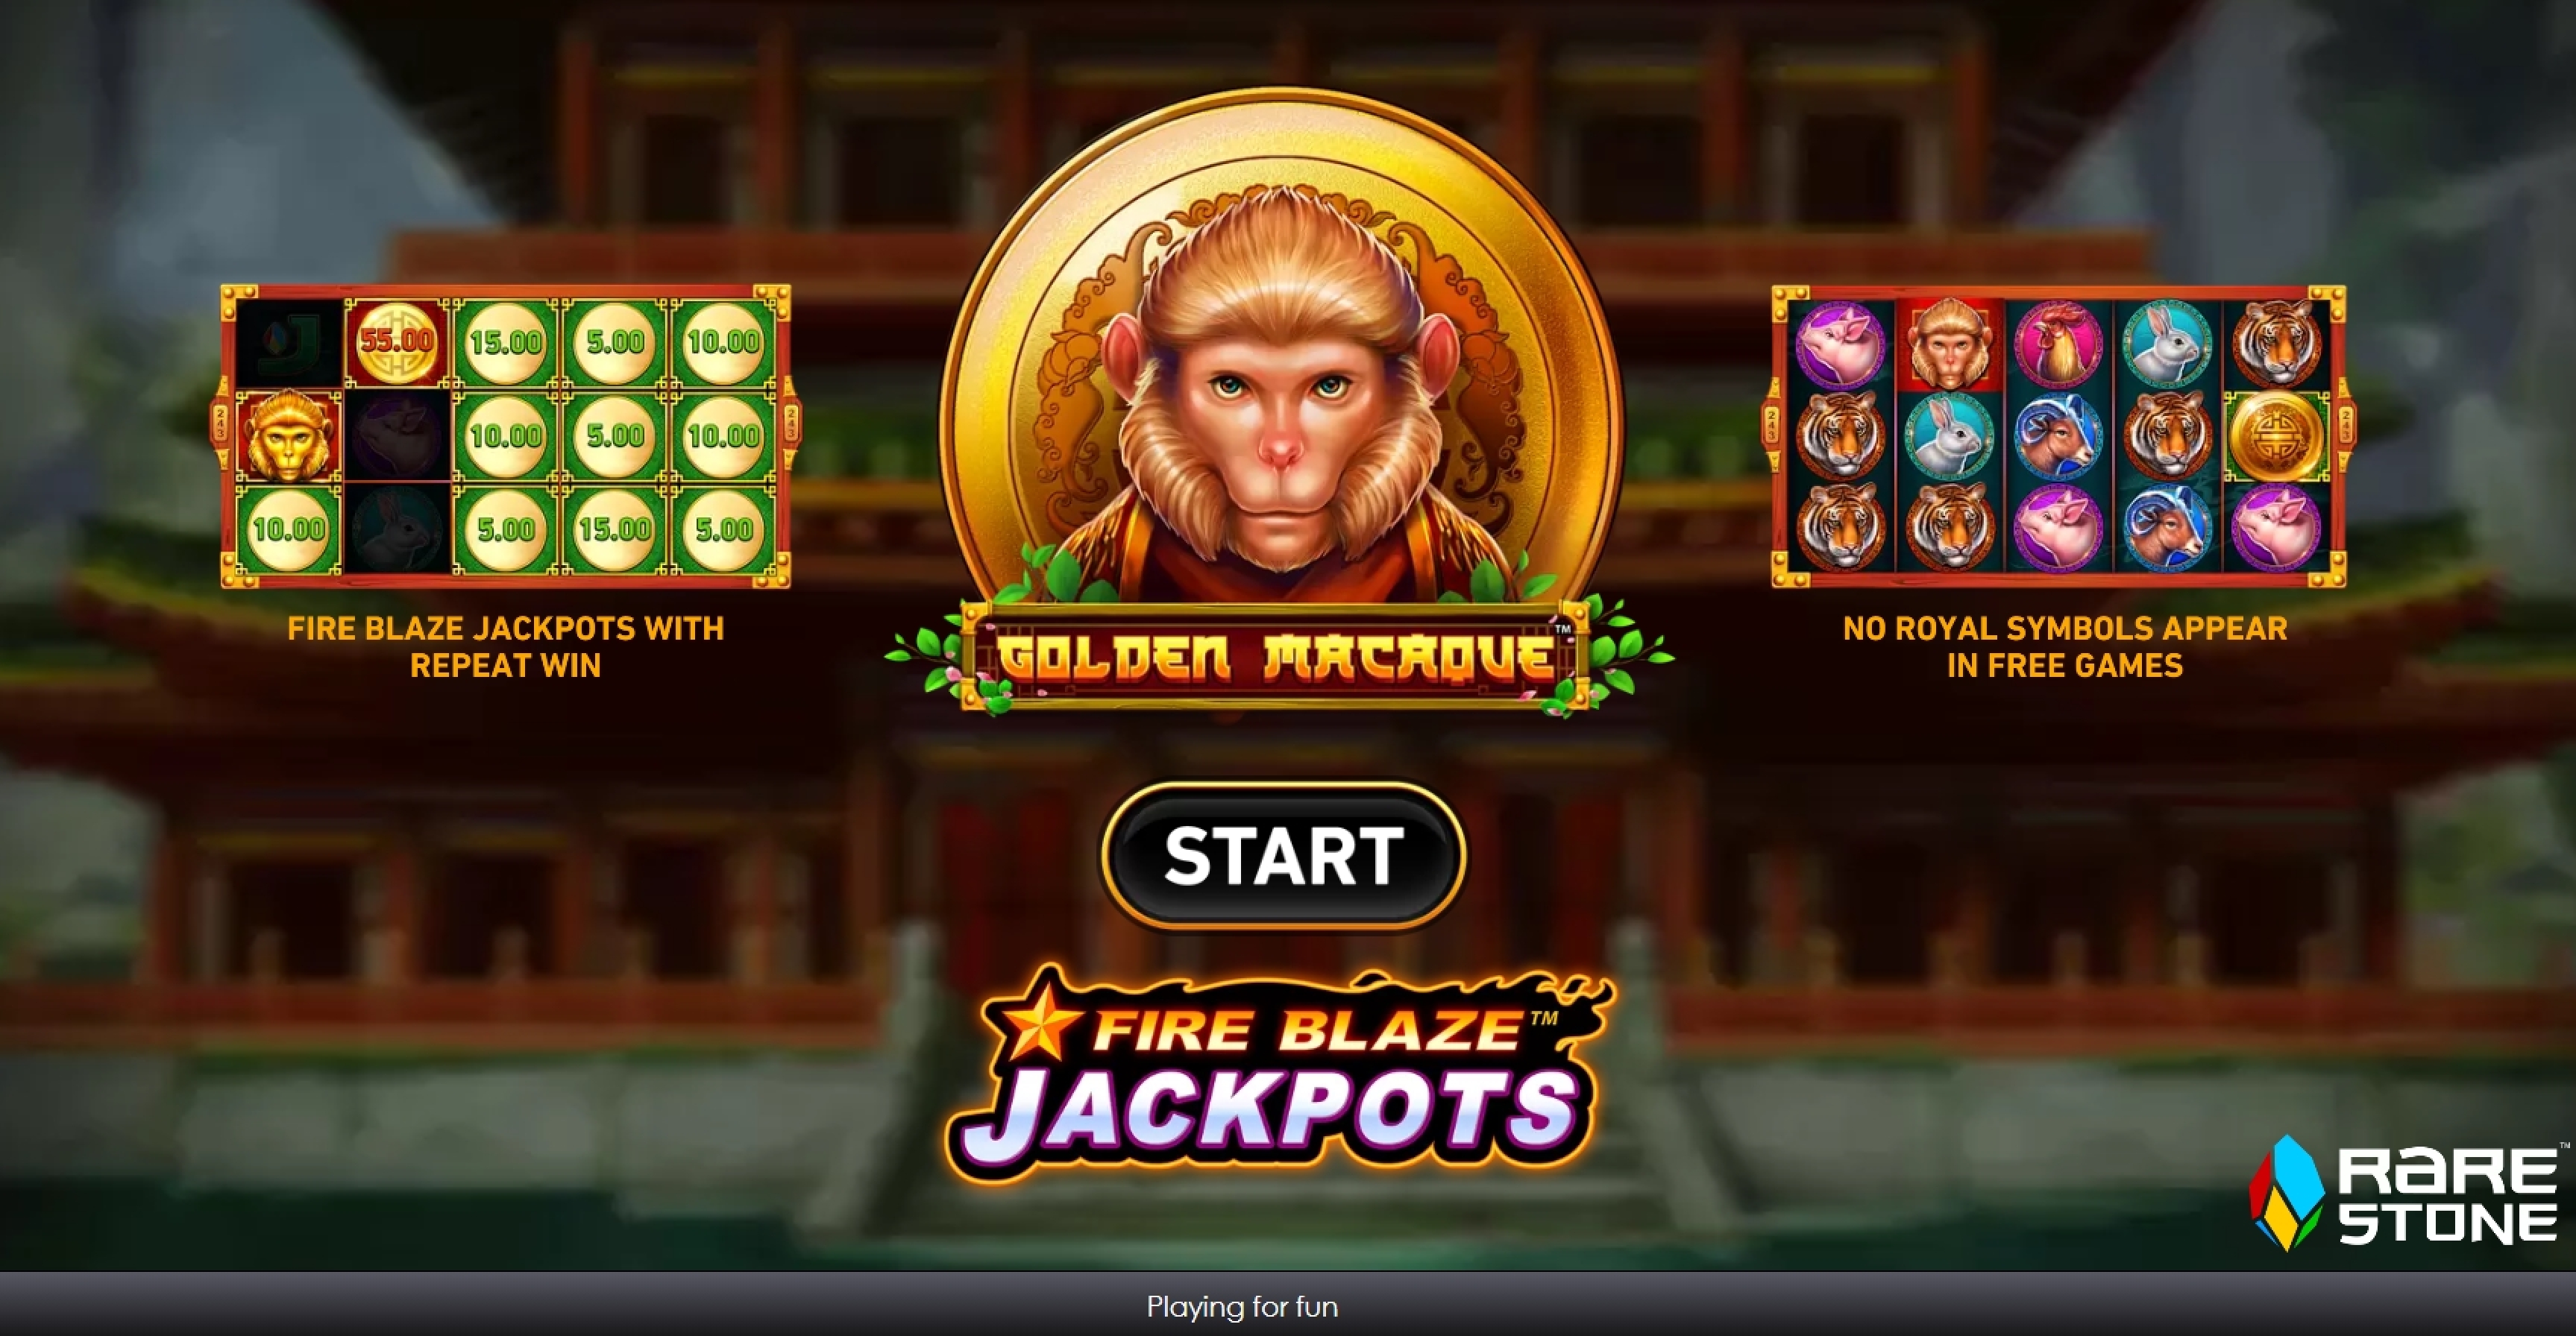 Play Golden Macaque Free Casino Slot Game by Rarestone Gaming